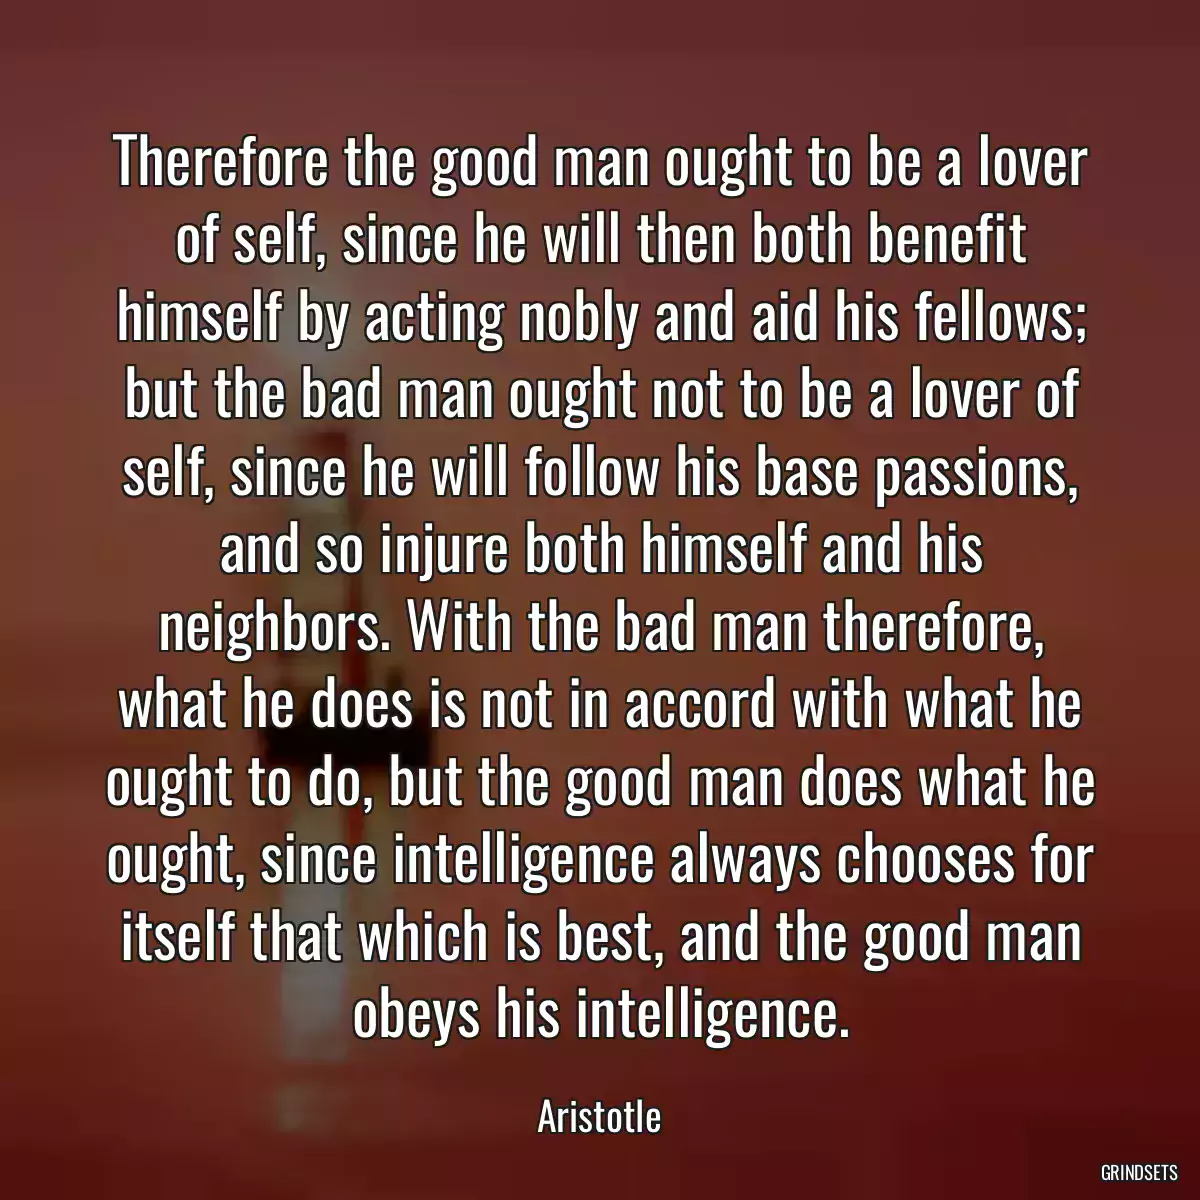 Therefore the good man ought to be a lover of self, since he will then both benefit himself by acting nobly and aid his fellows; but the bad man ought not to be a lover of self, since he will follow his base passions, and so injure both himself and his neighbors. With the bad man therefore, what he does is not in accord with what he ought to do, but the good man does what he ought, since intelligence always chooses for itself that which is best, and the good man obeys his intelligence.